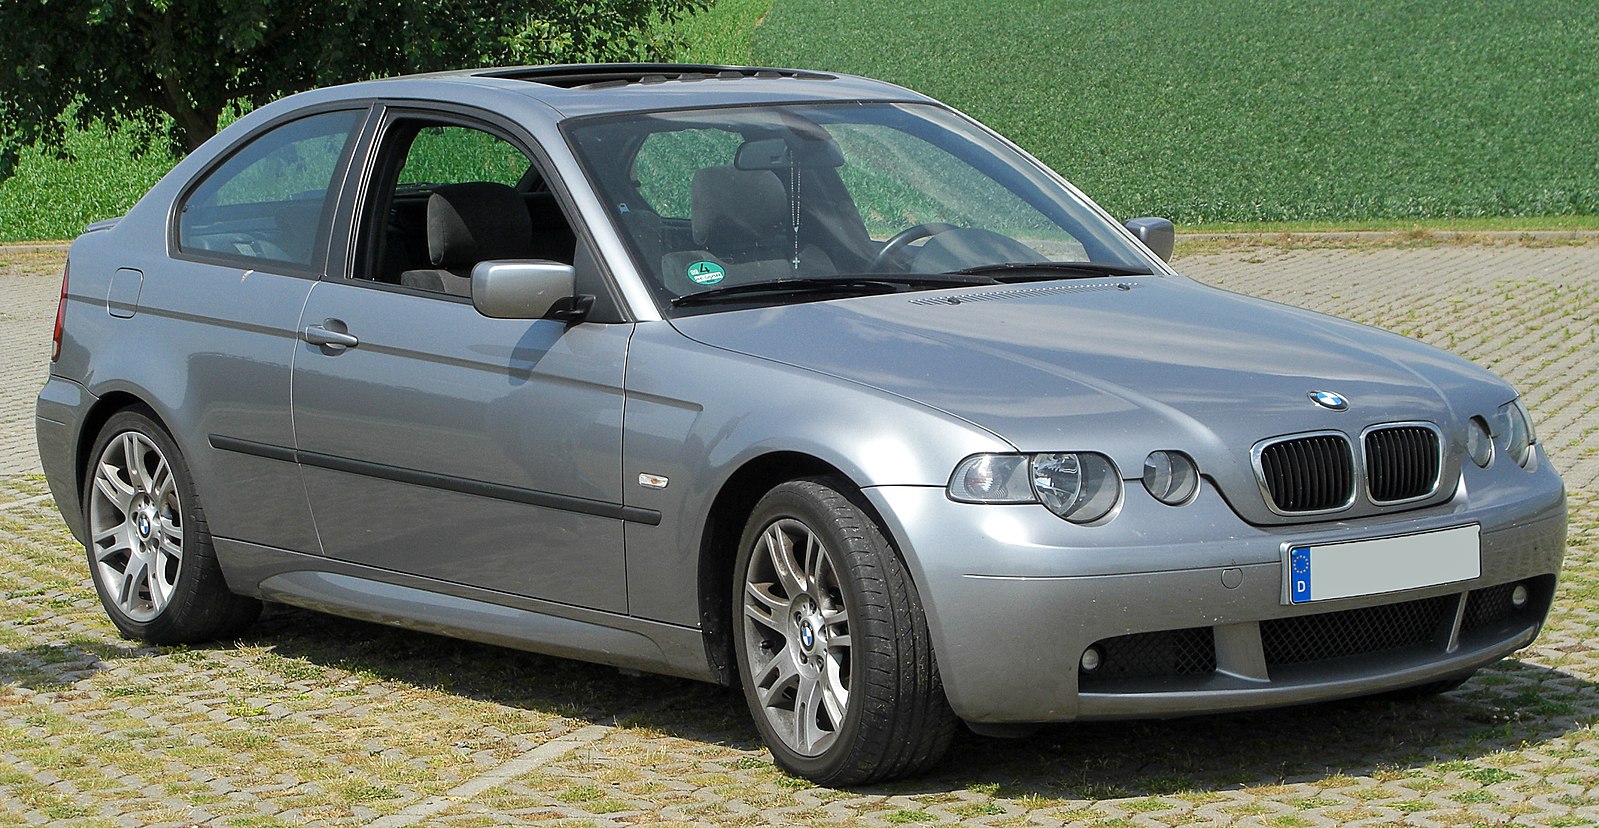 BMW_316ti_Compact_M-Sportpaket_(E46)_Facelift_front-2_20100627.jpg